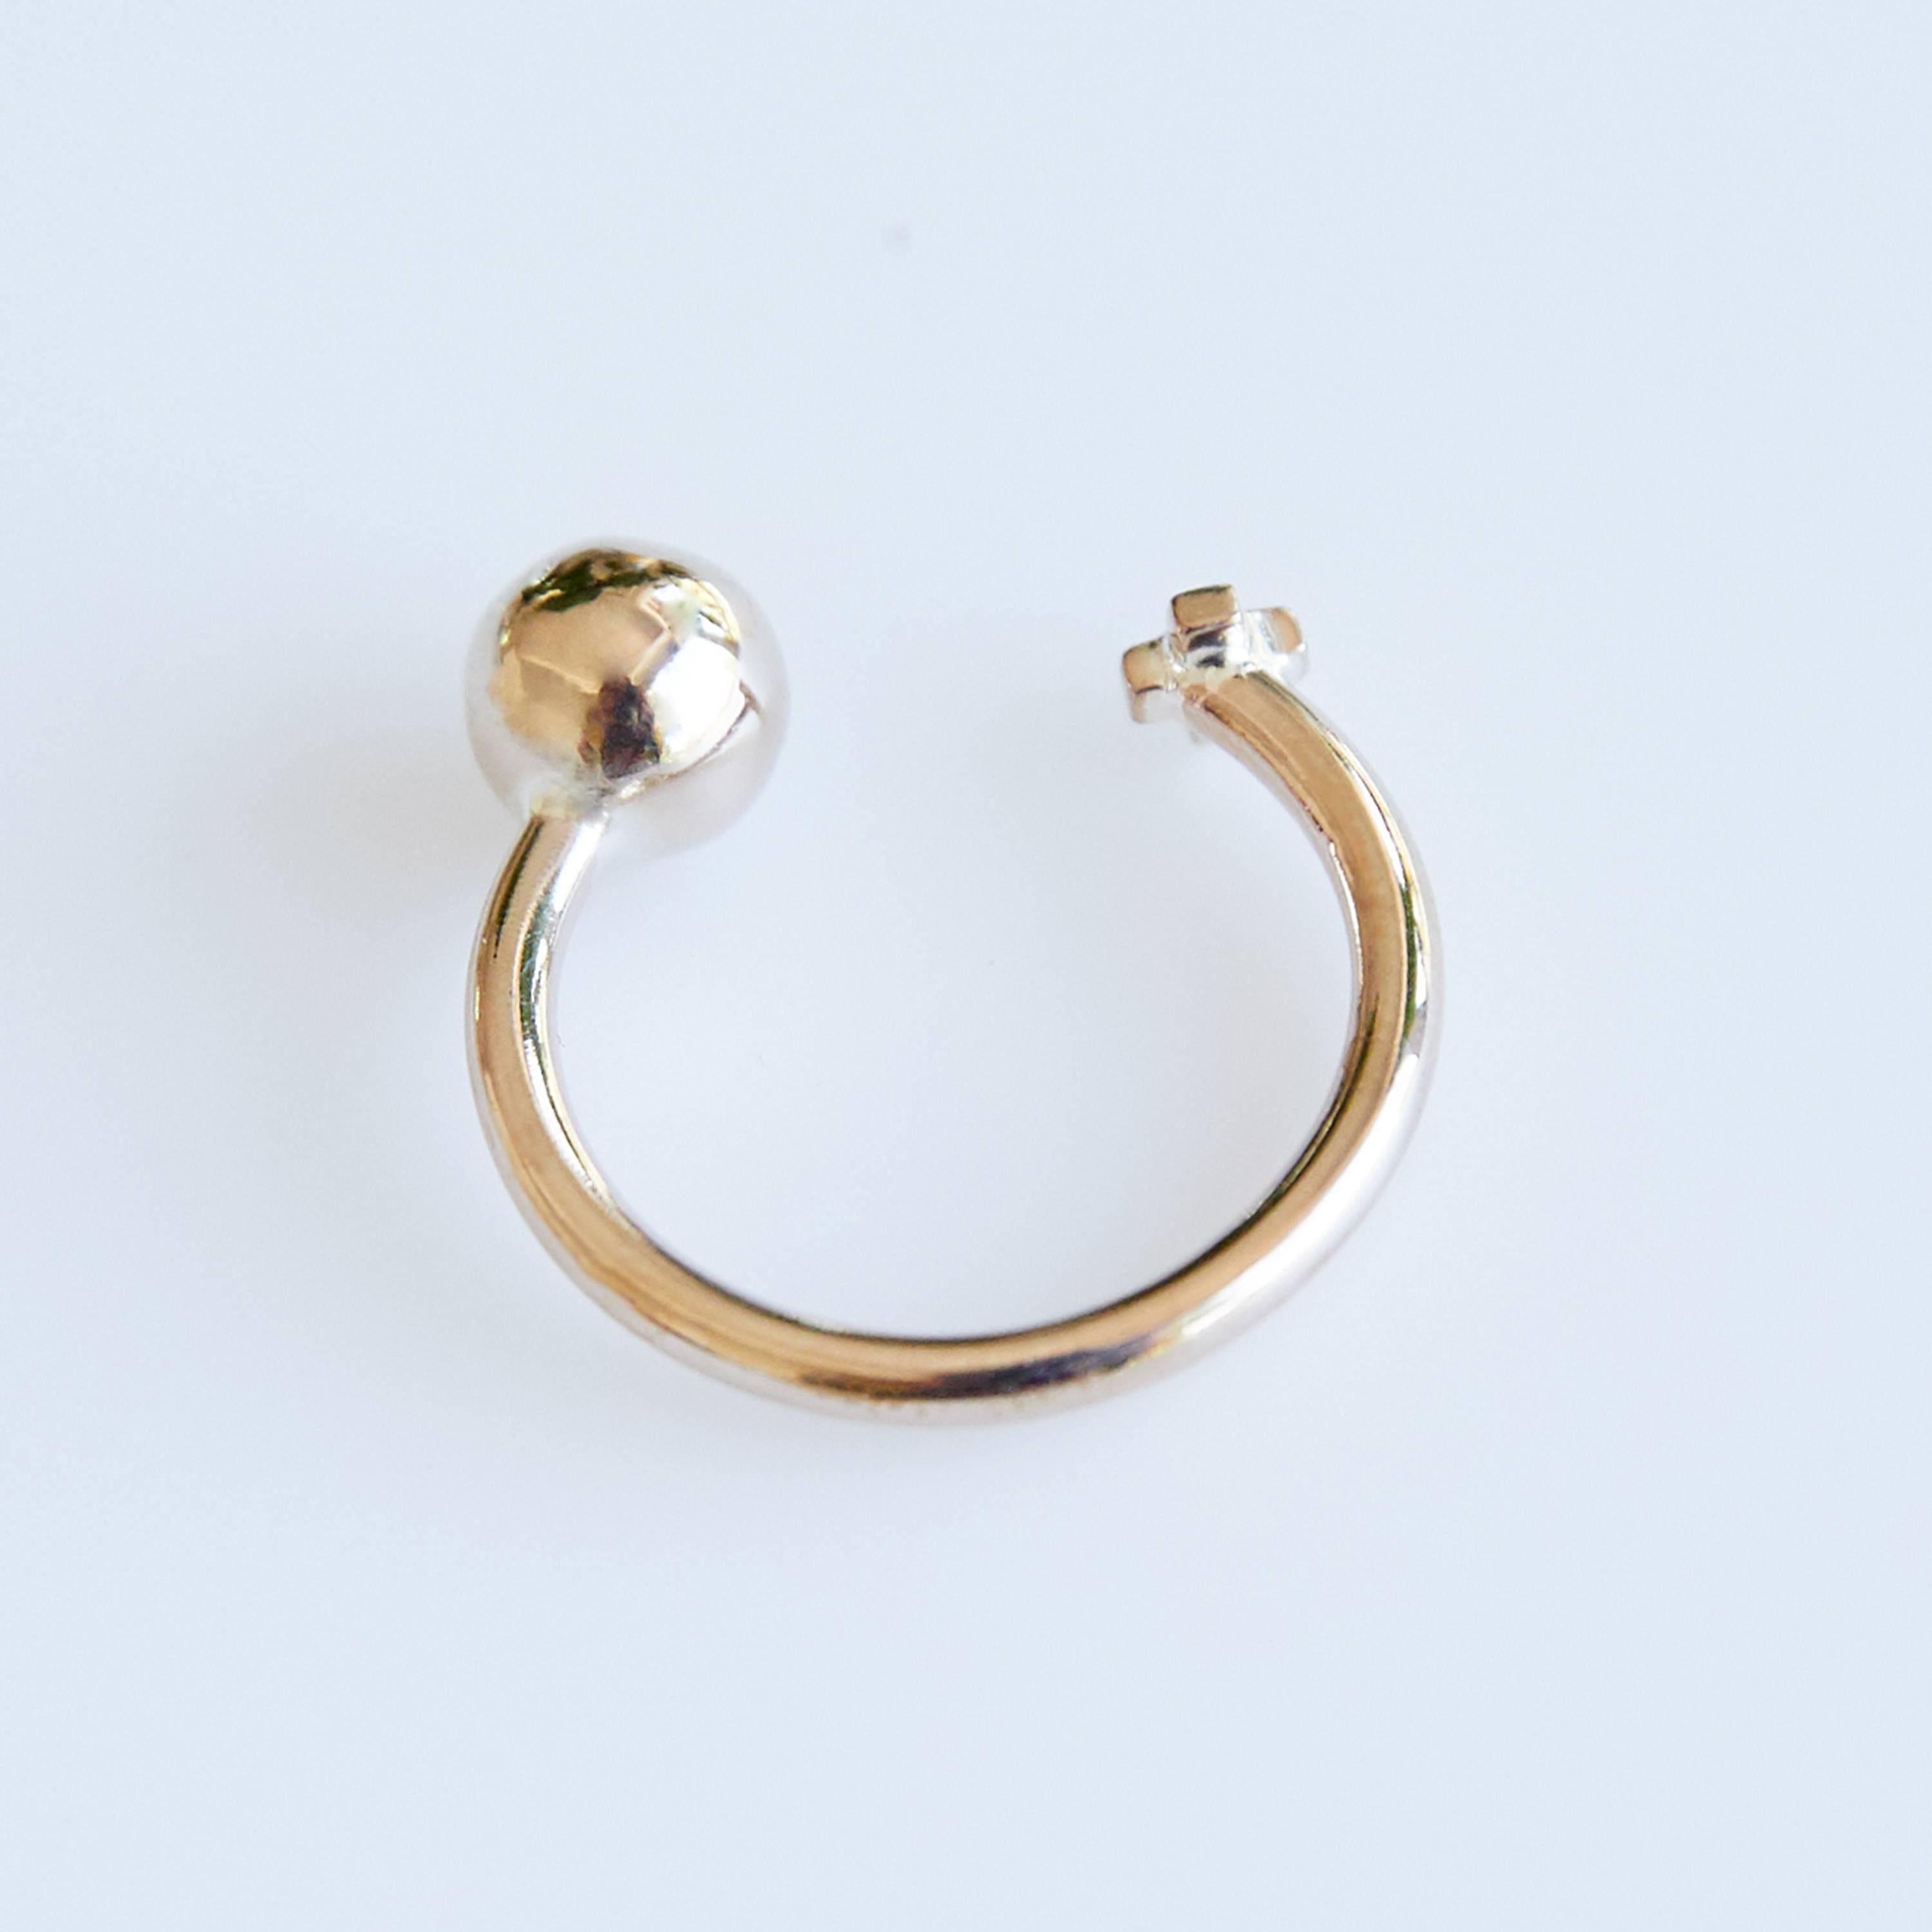 Uncut Pearl Gold Ring Cross Cocktail Ring J Dauphin For Sale